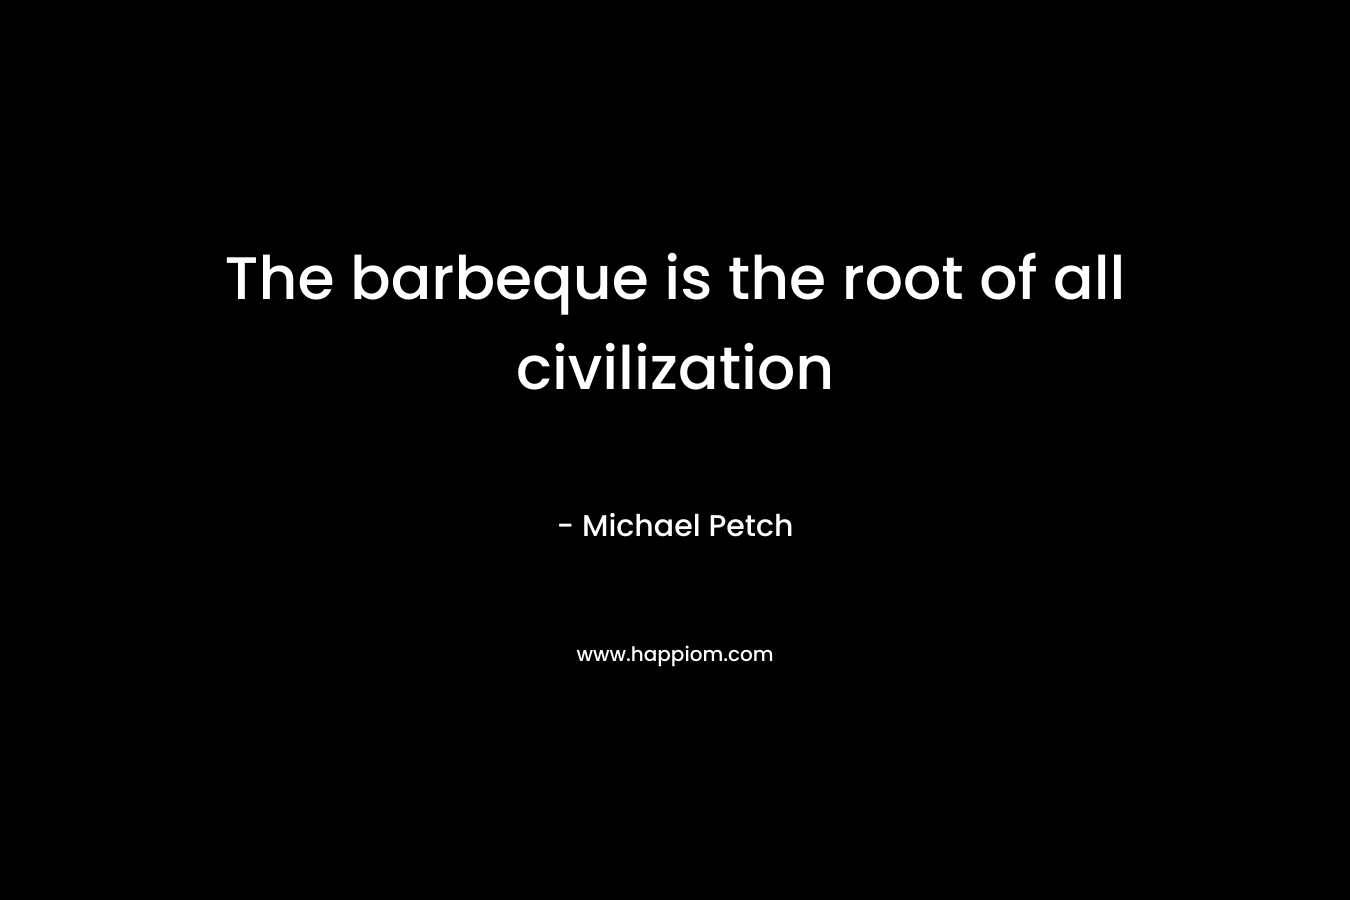 The barbeque is the root of all civilization